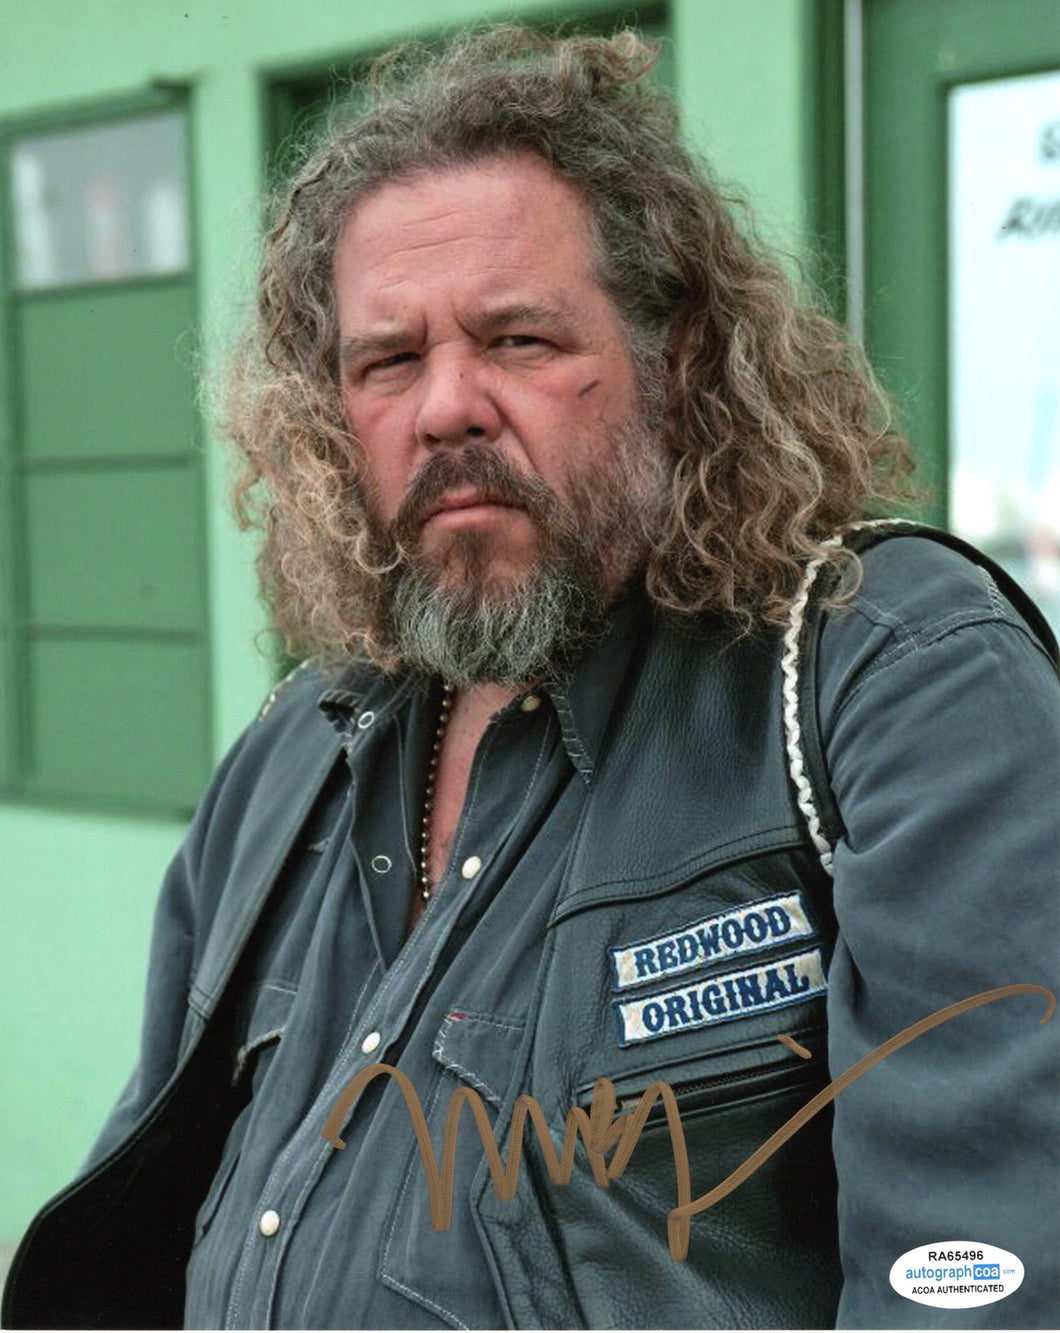 SONS OF ANARCHY Mark Boone Junior Autograph 8x10 Photo